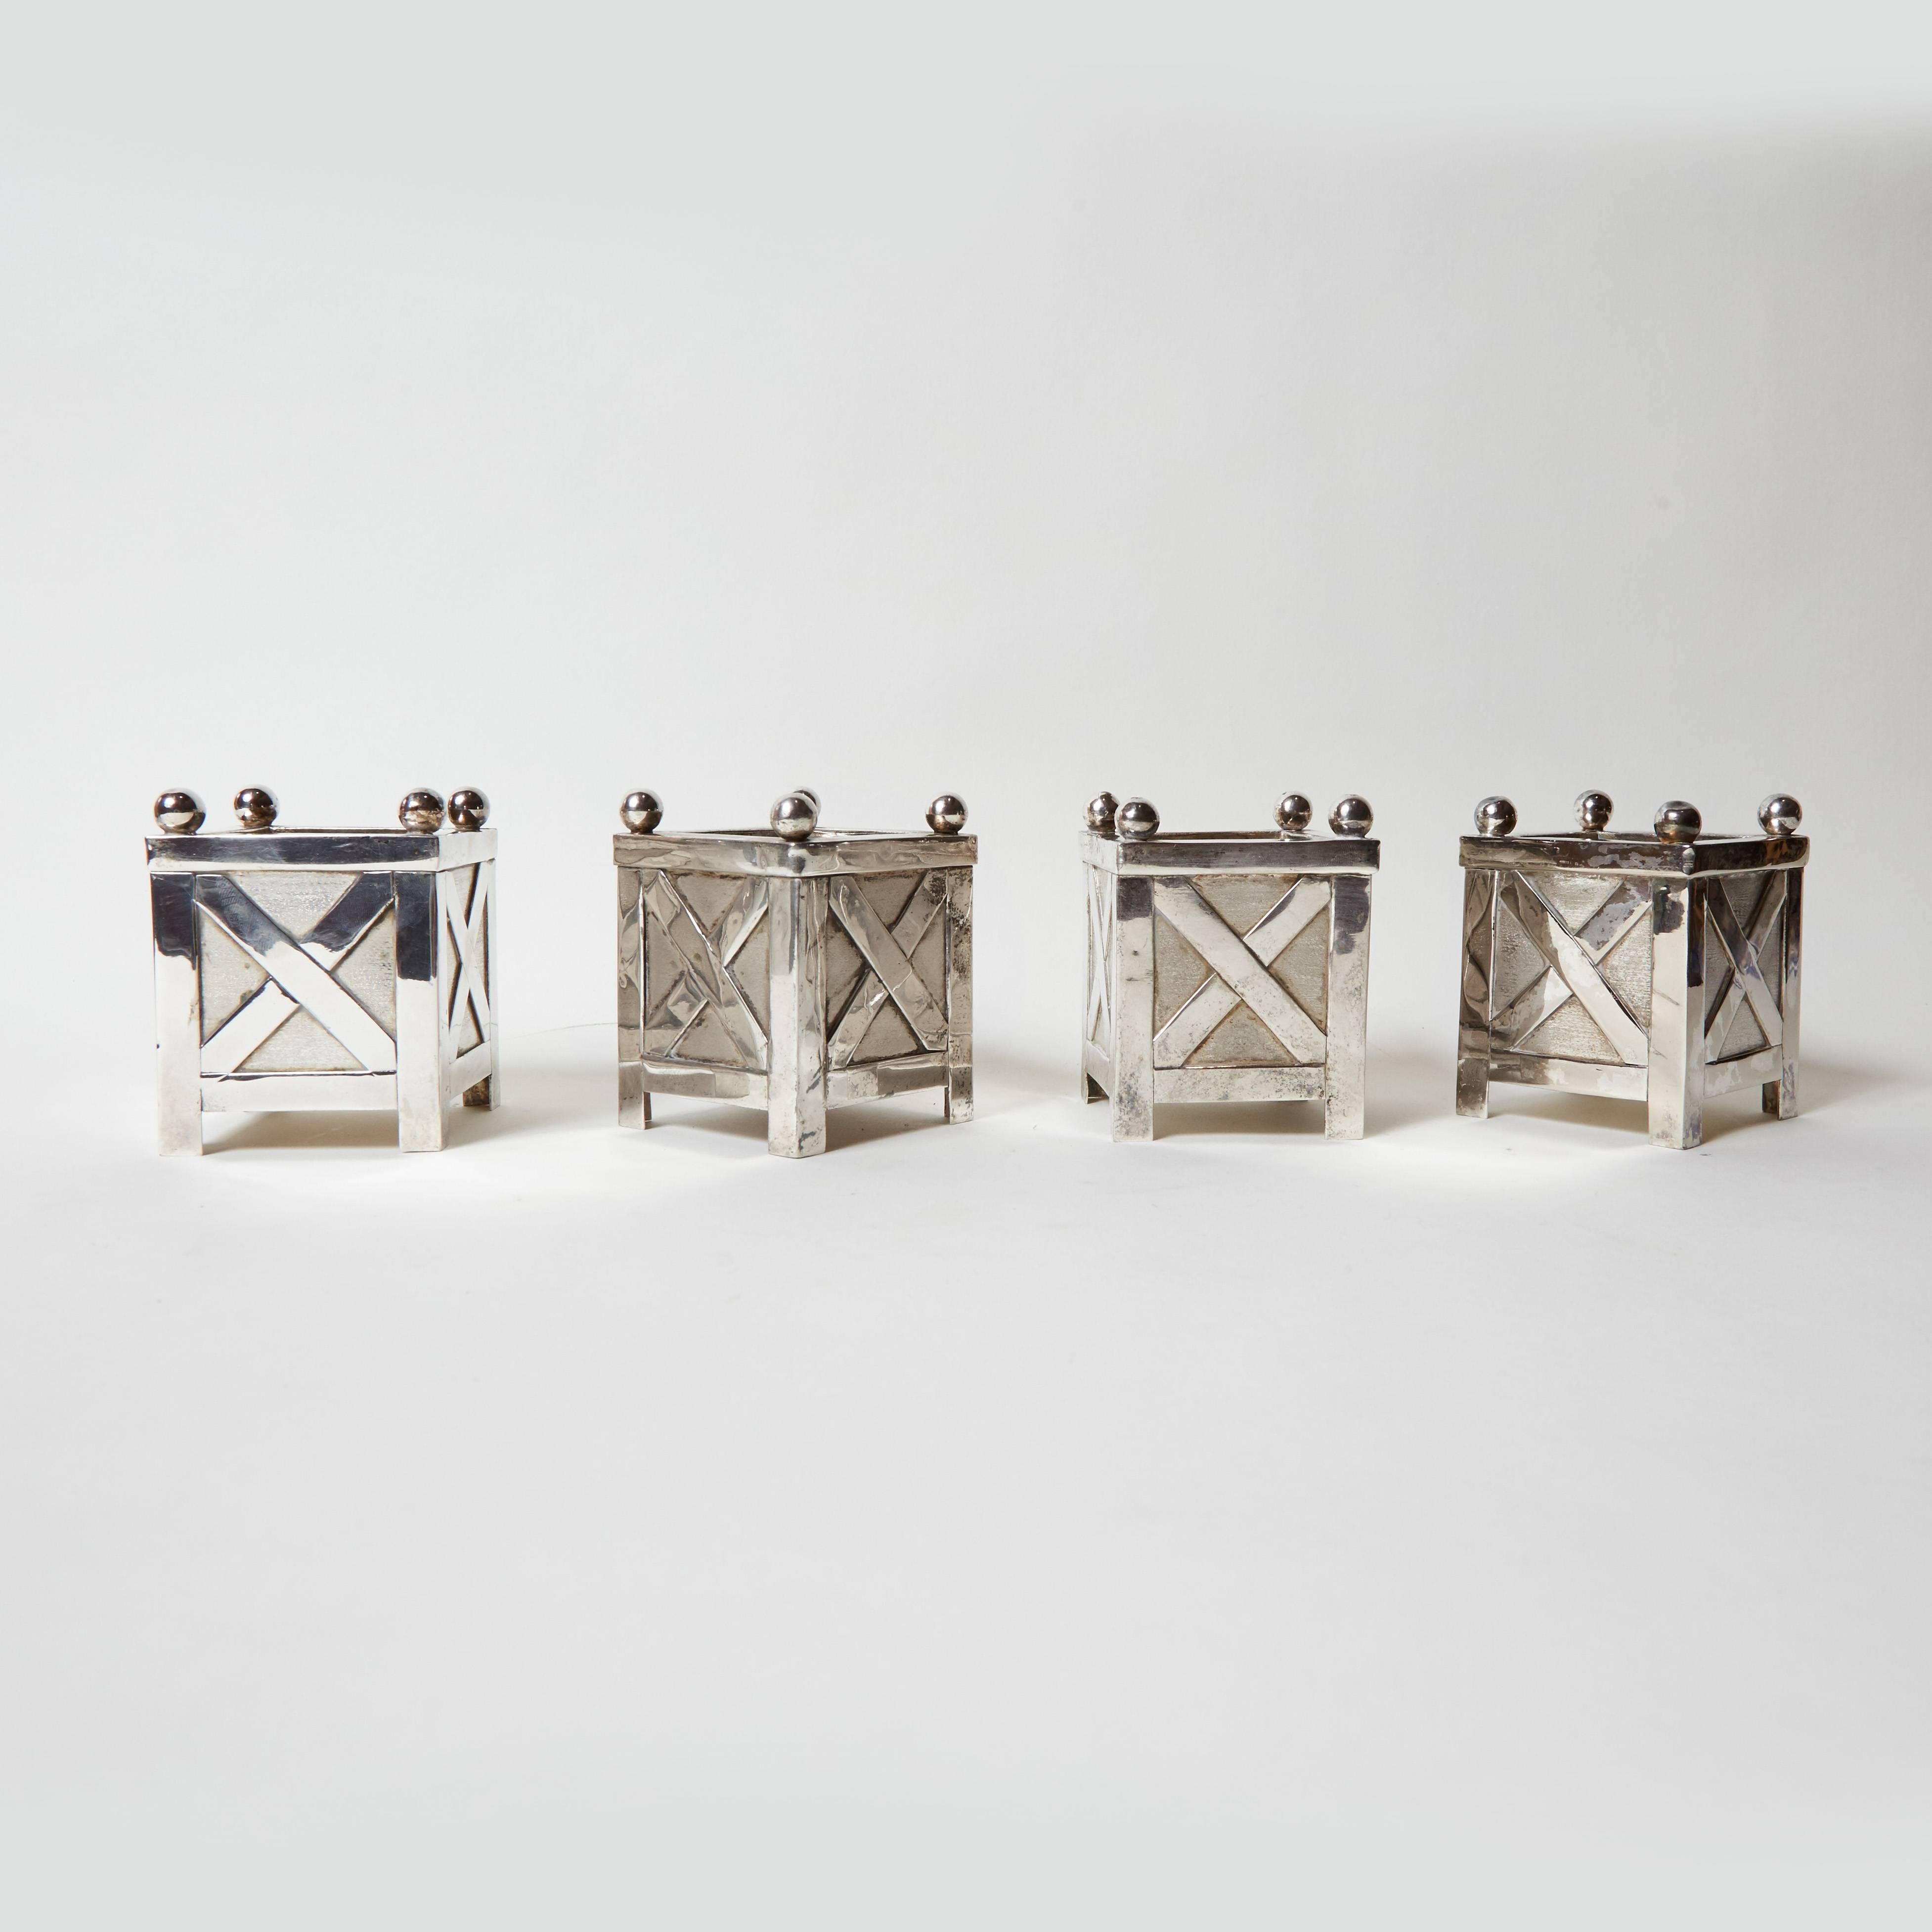 Four miniature planter boxes silver.
For candles or flowers.
 